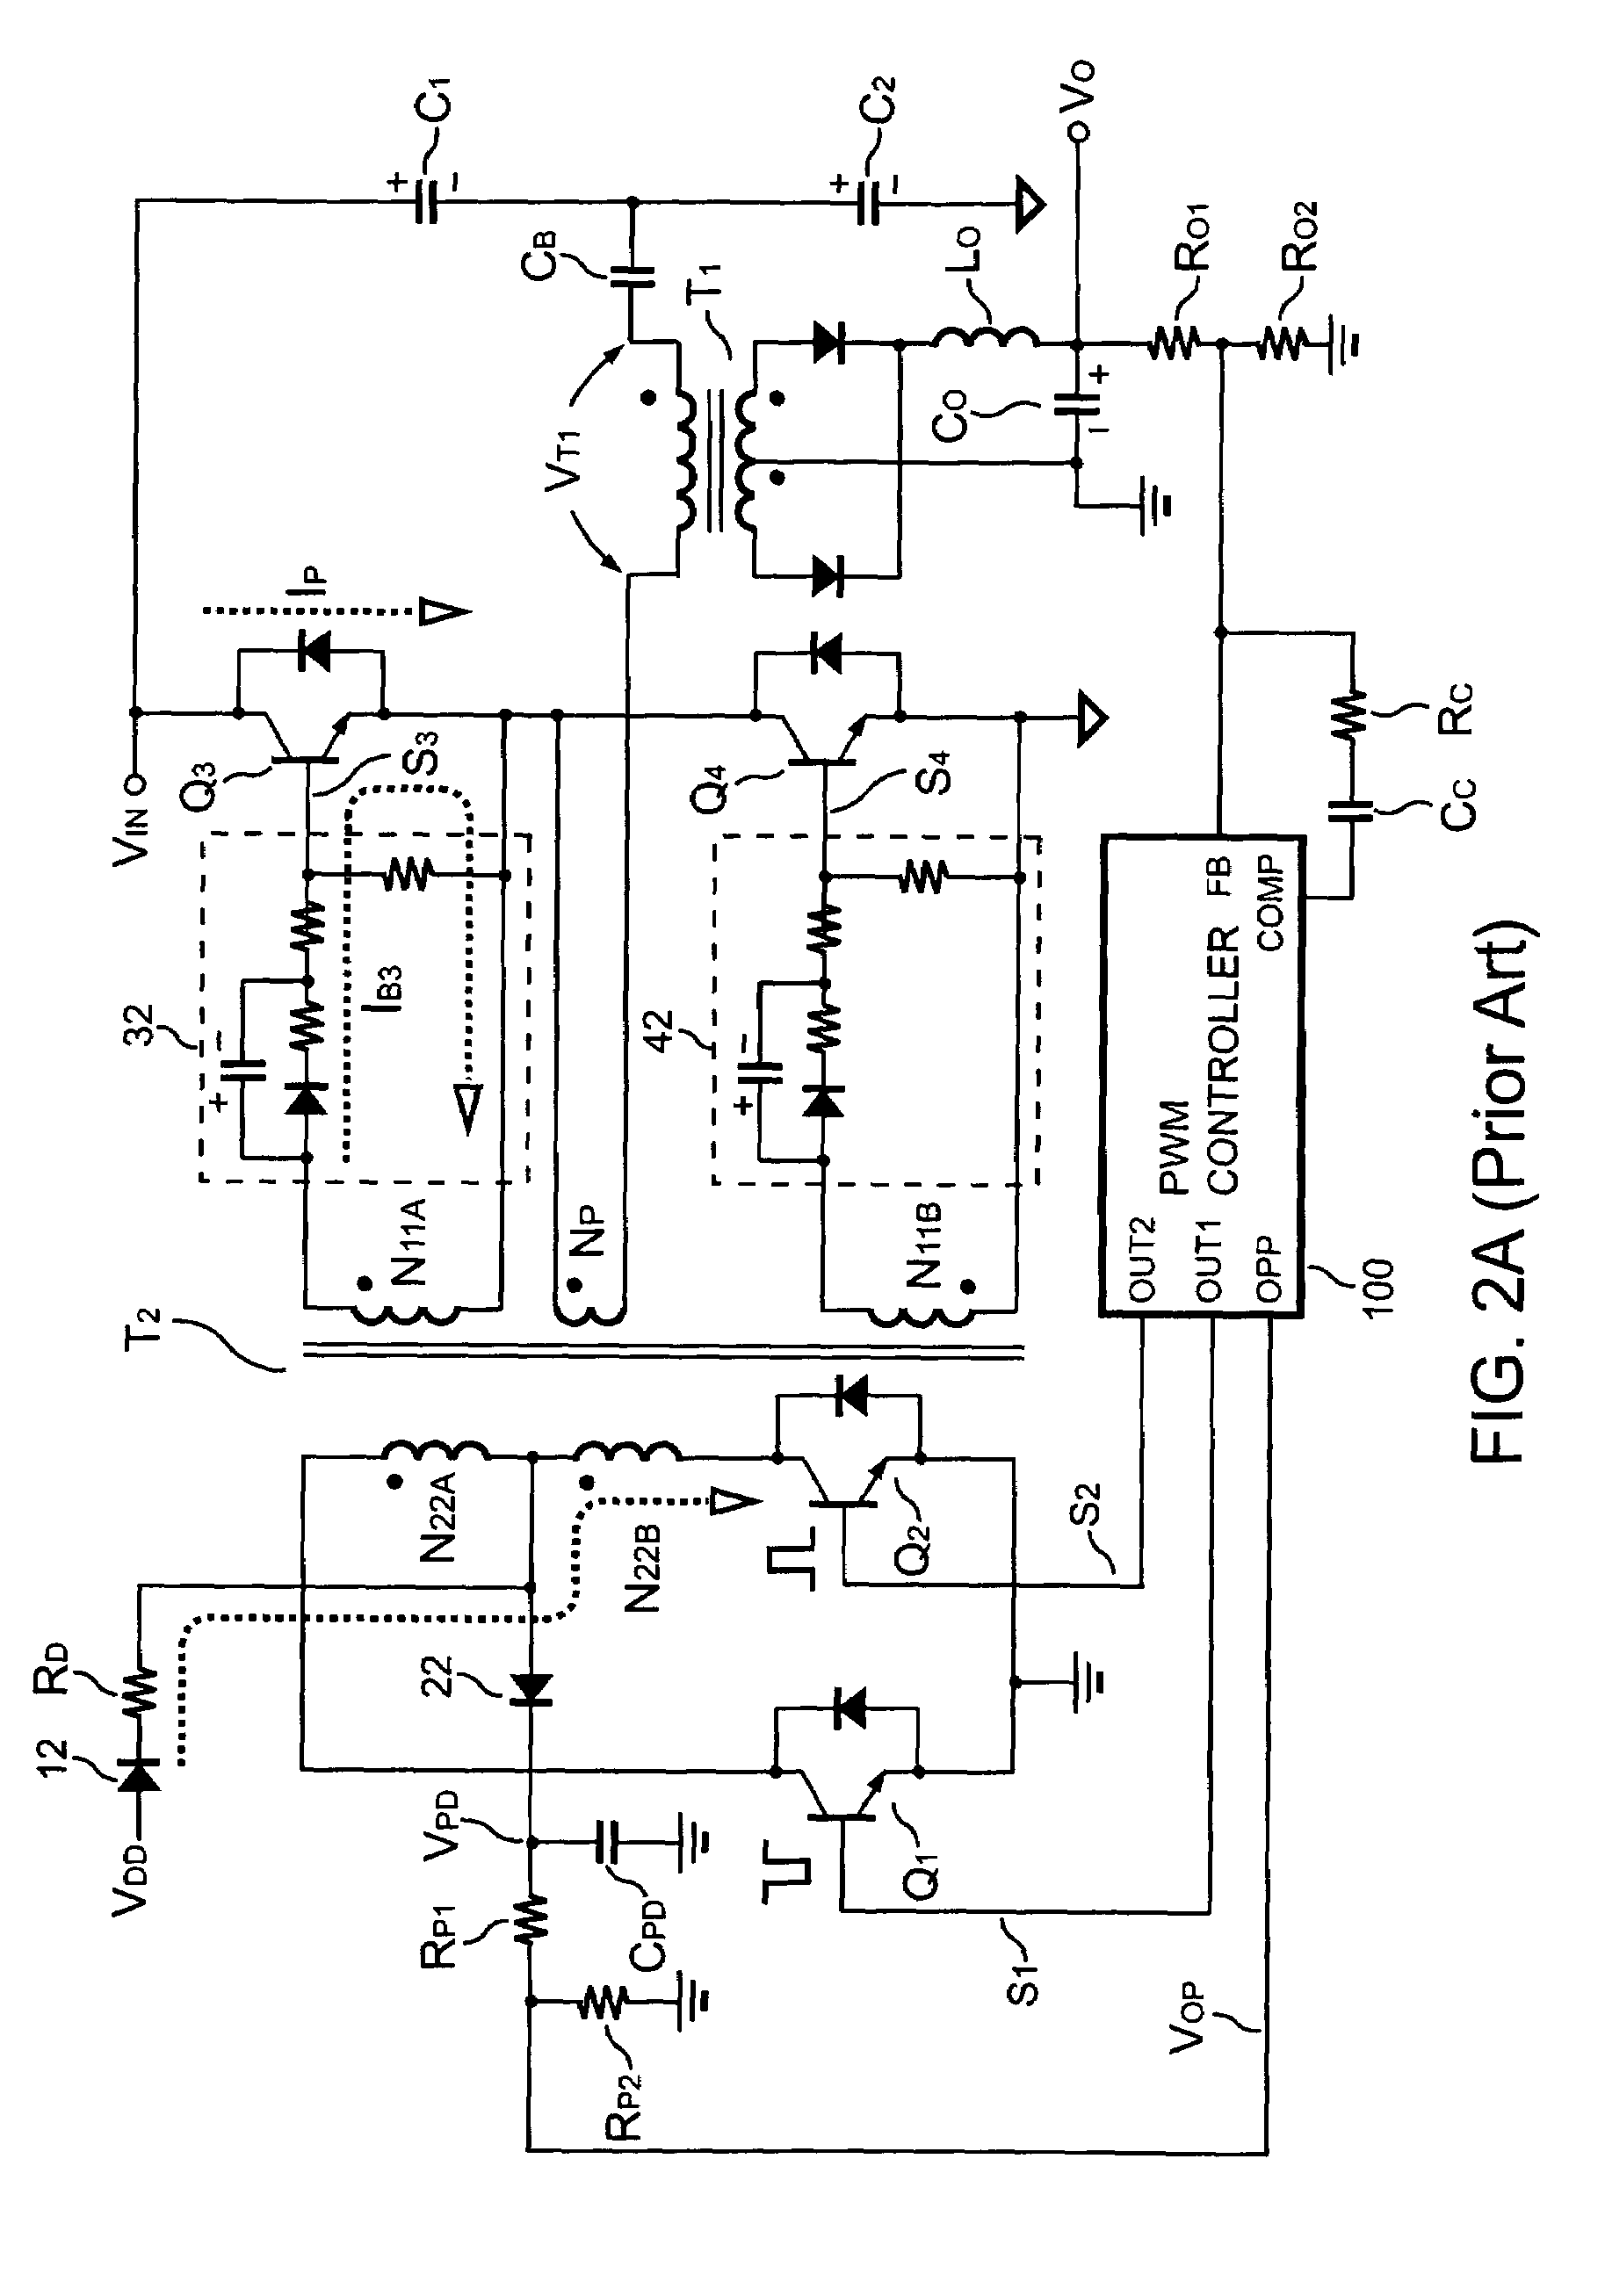 Over-power protection apparatus for self-excited power converter